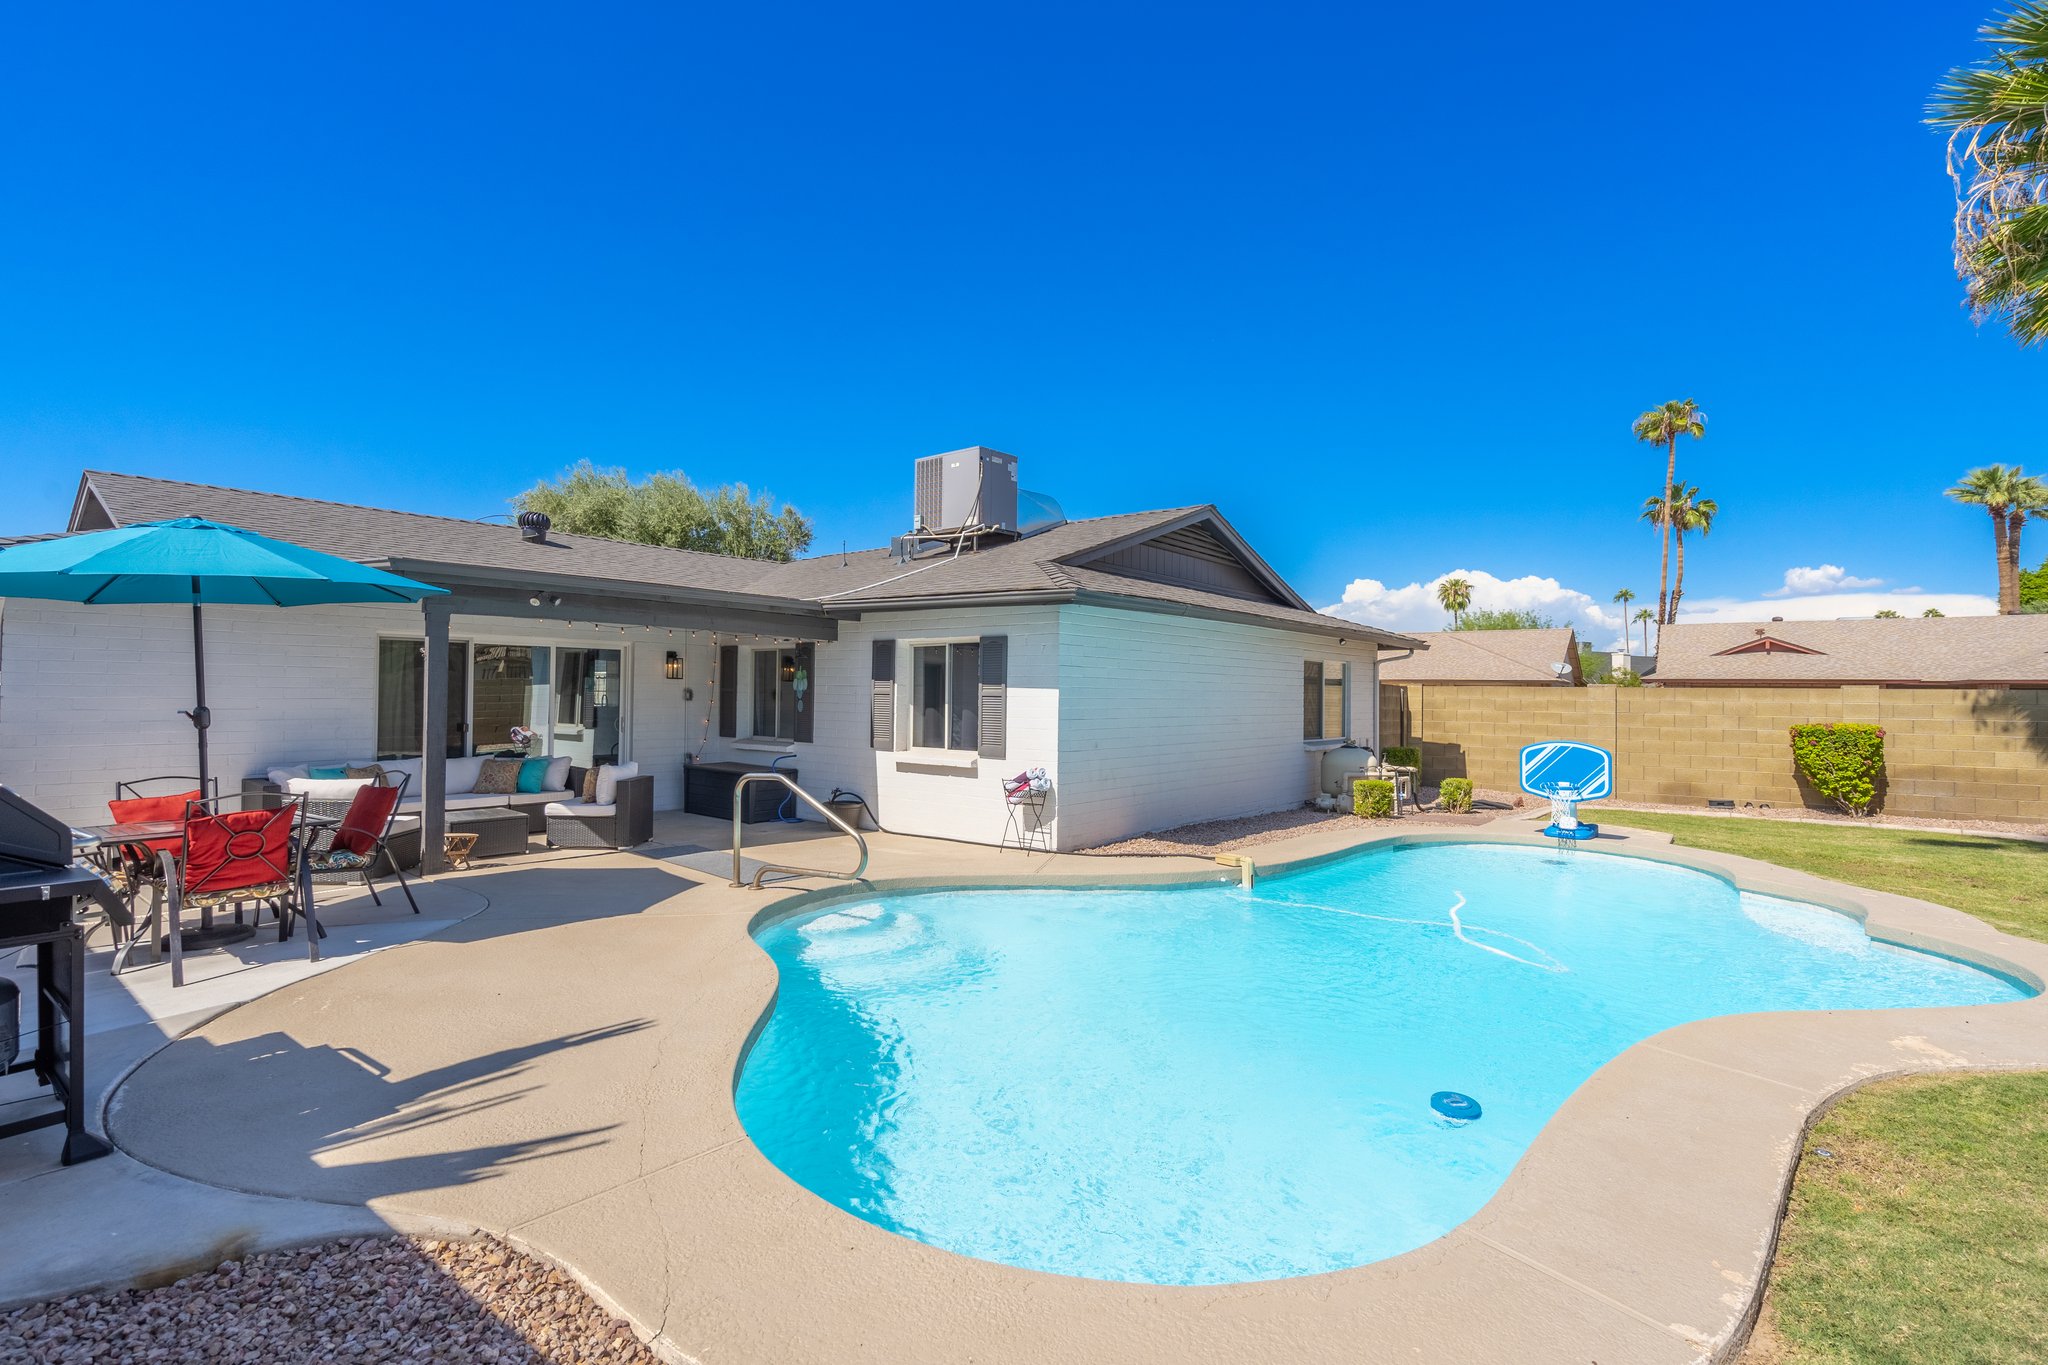 Property Image 1 - NEW! Relaxing Mesa Poolside Retreat, Near Tempe!